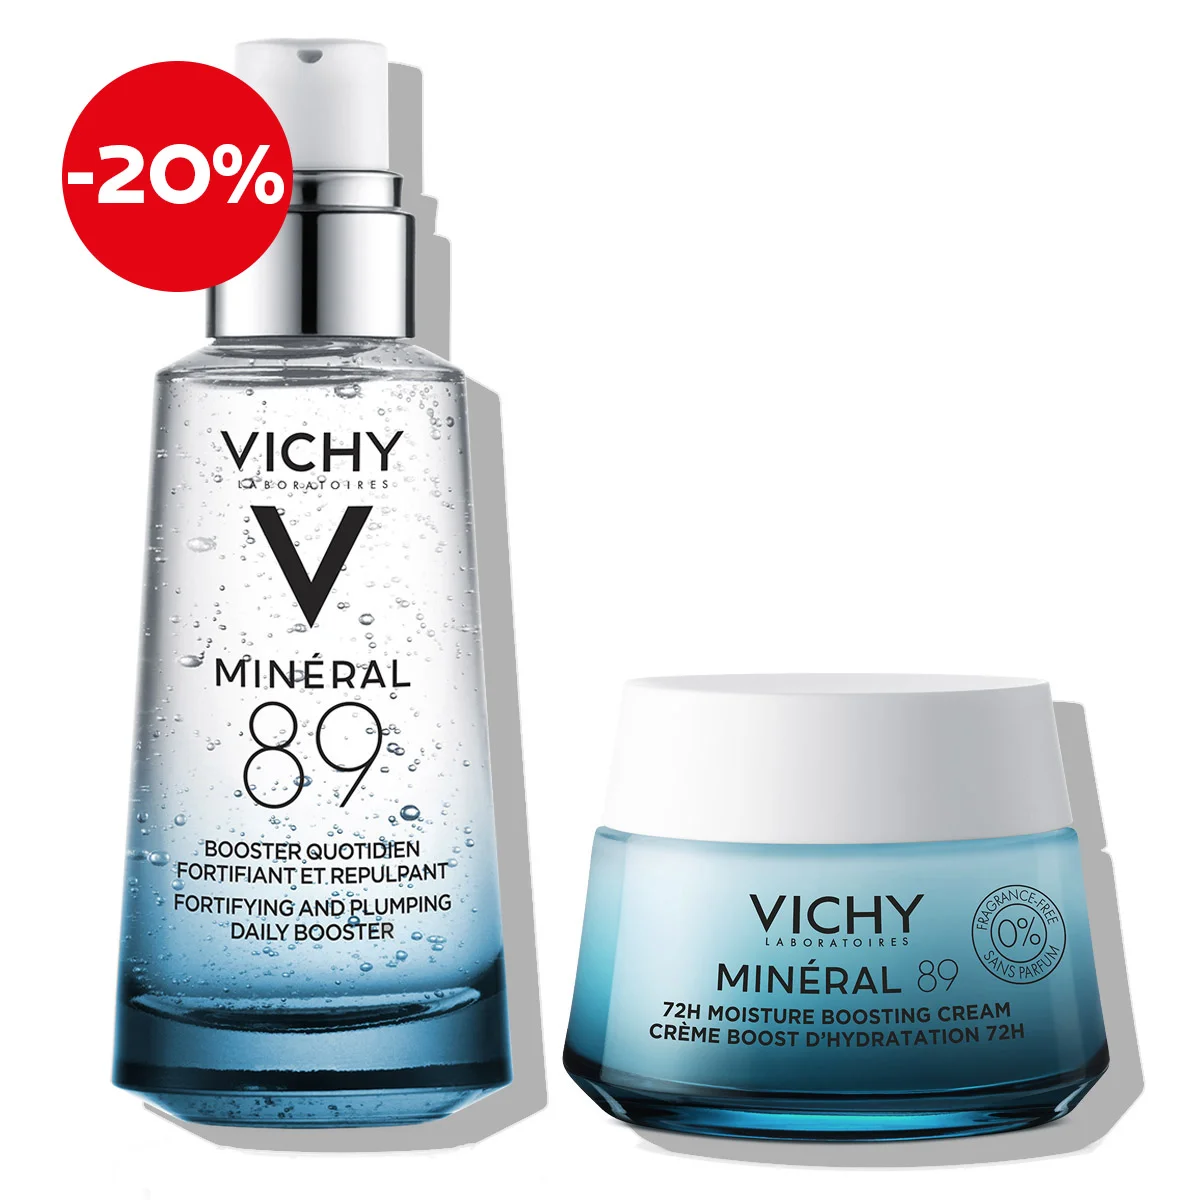 Vichy MINERAL 89 Protocol for intensive hydration and stronger skin for all skin types (2) (1)